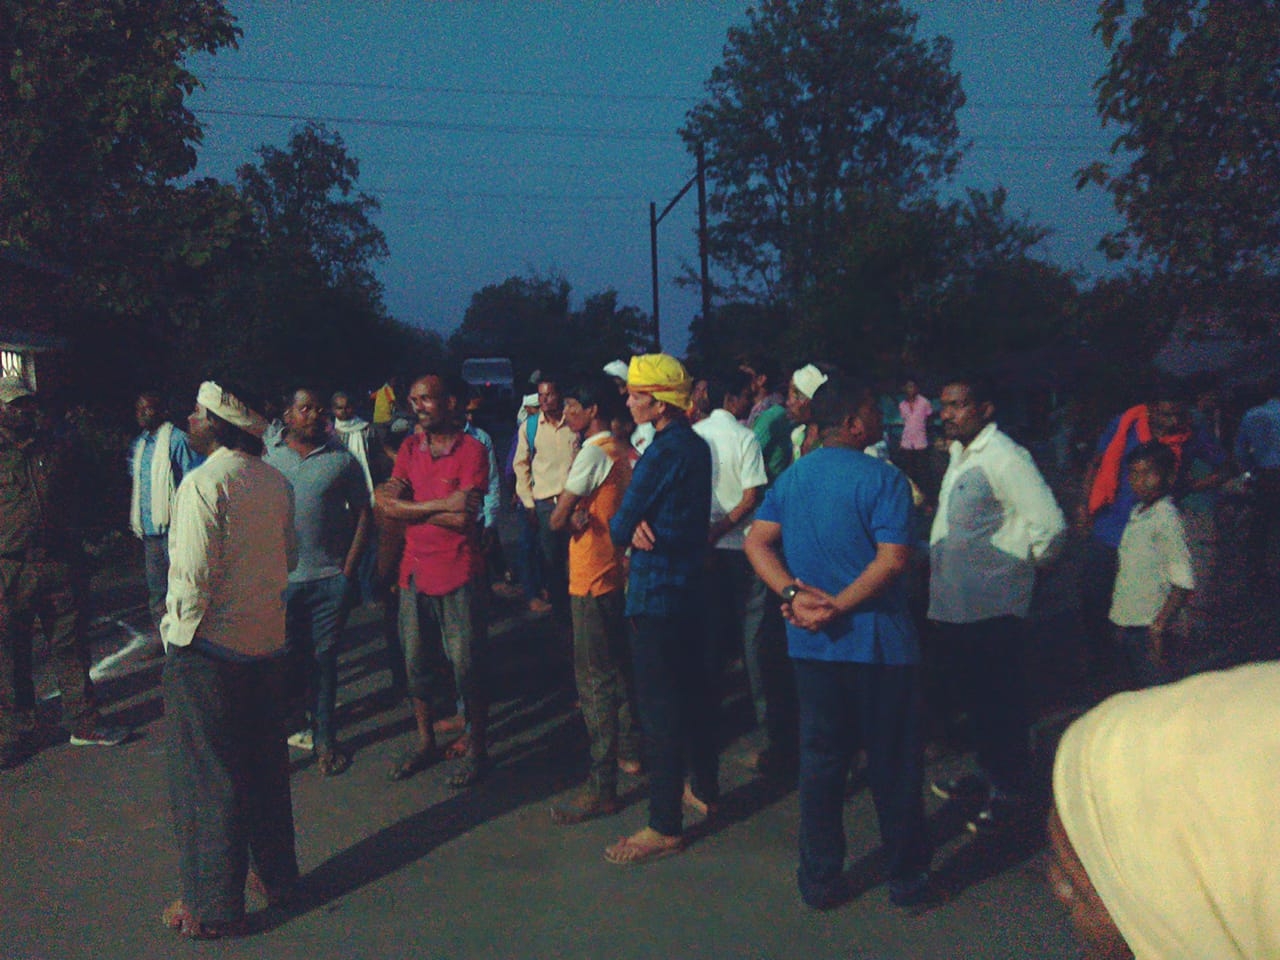 Villagers block the mine complex if they stop meeting CMD